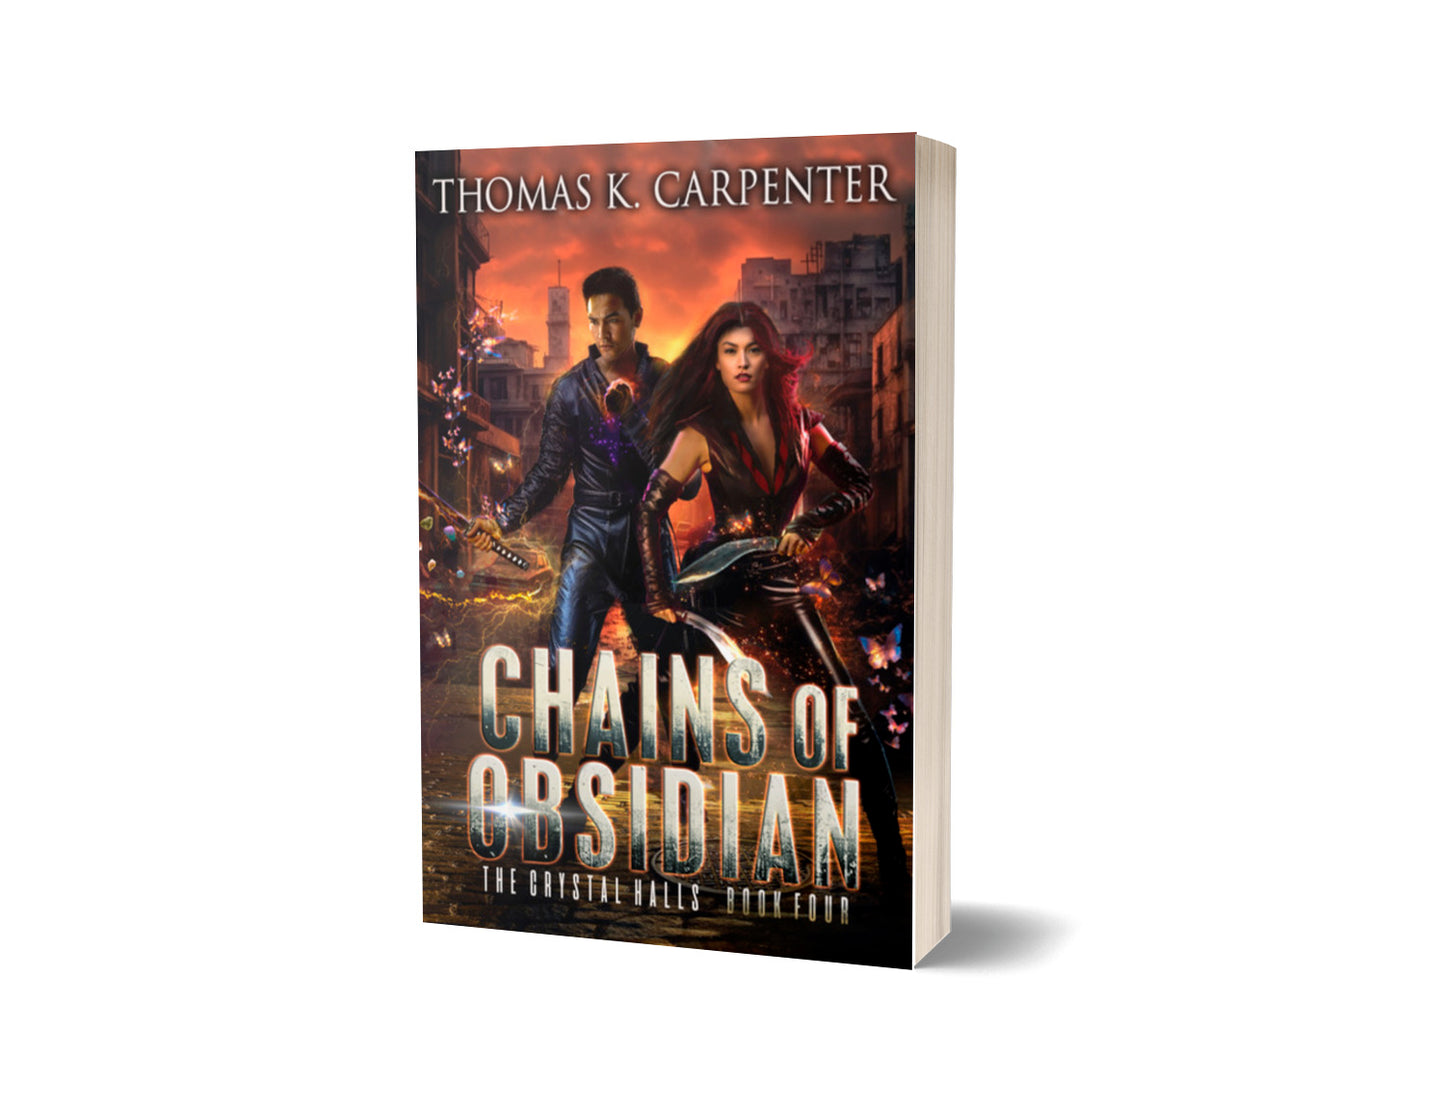 Chains of Obsidian